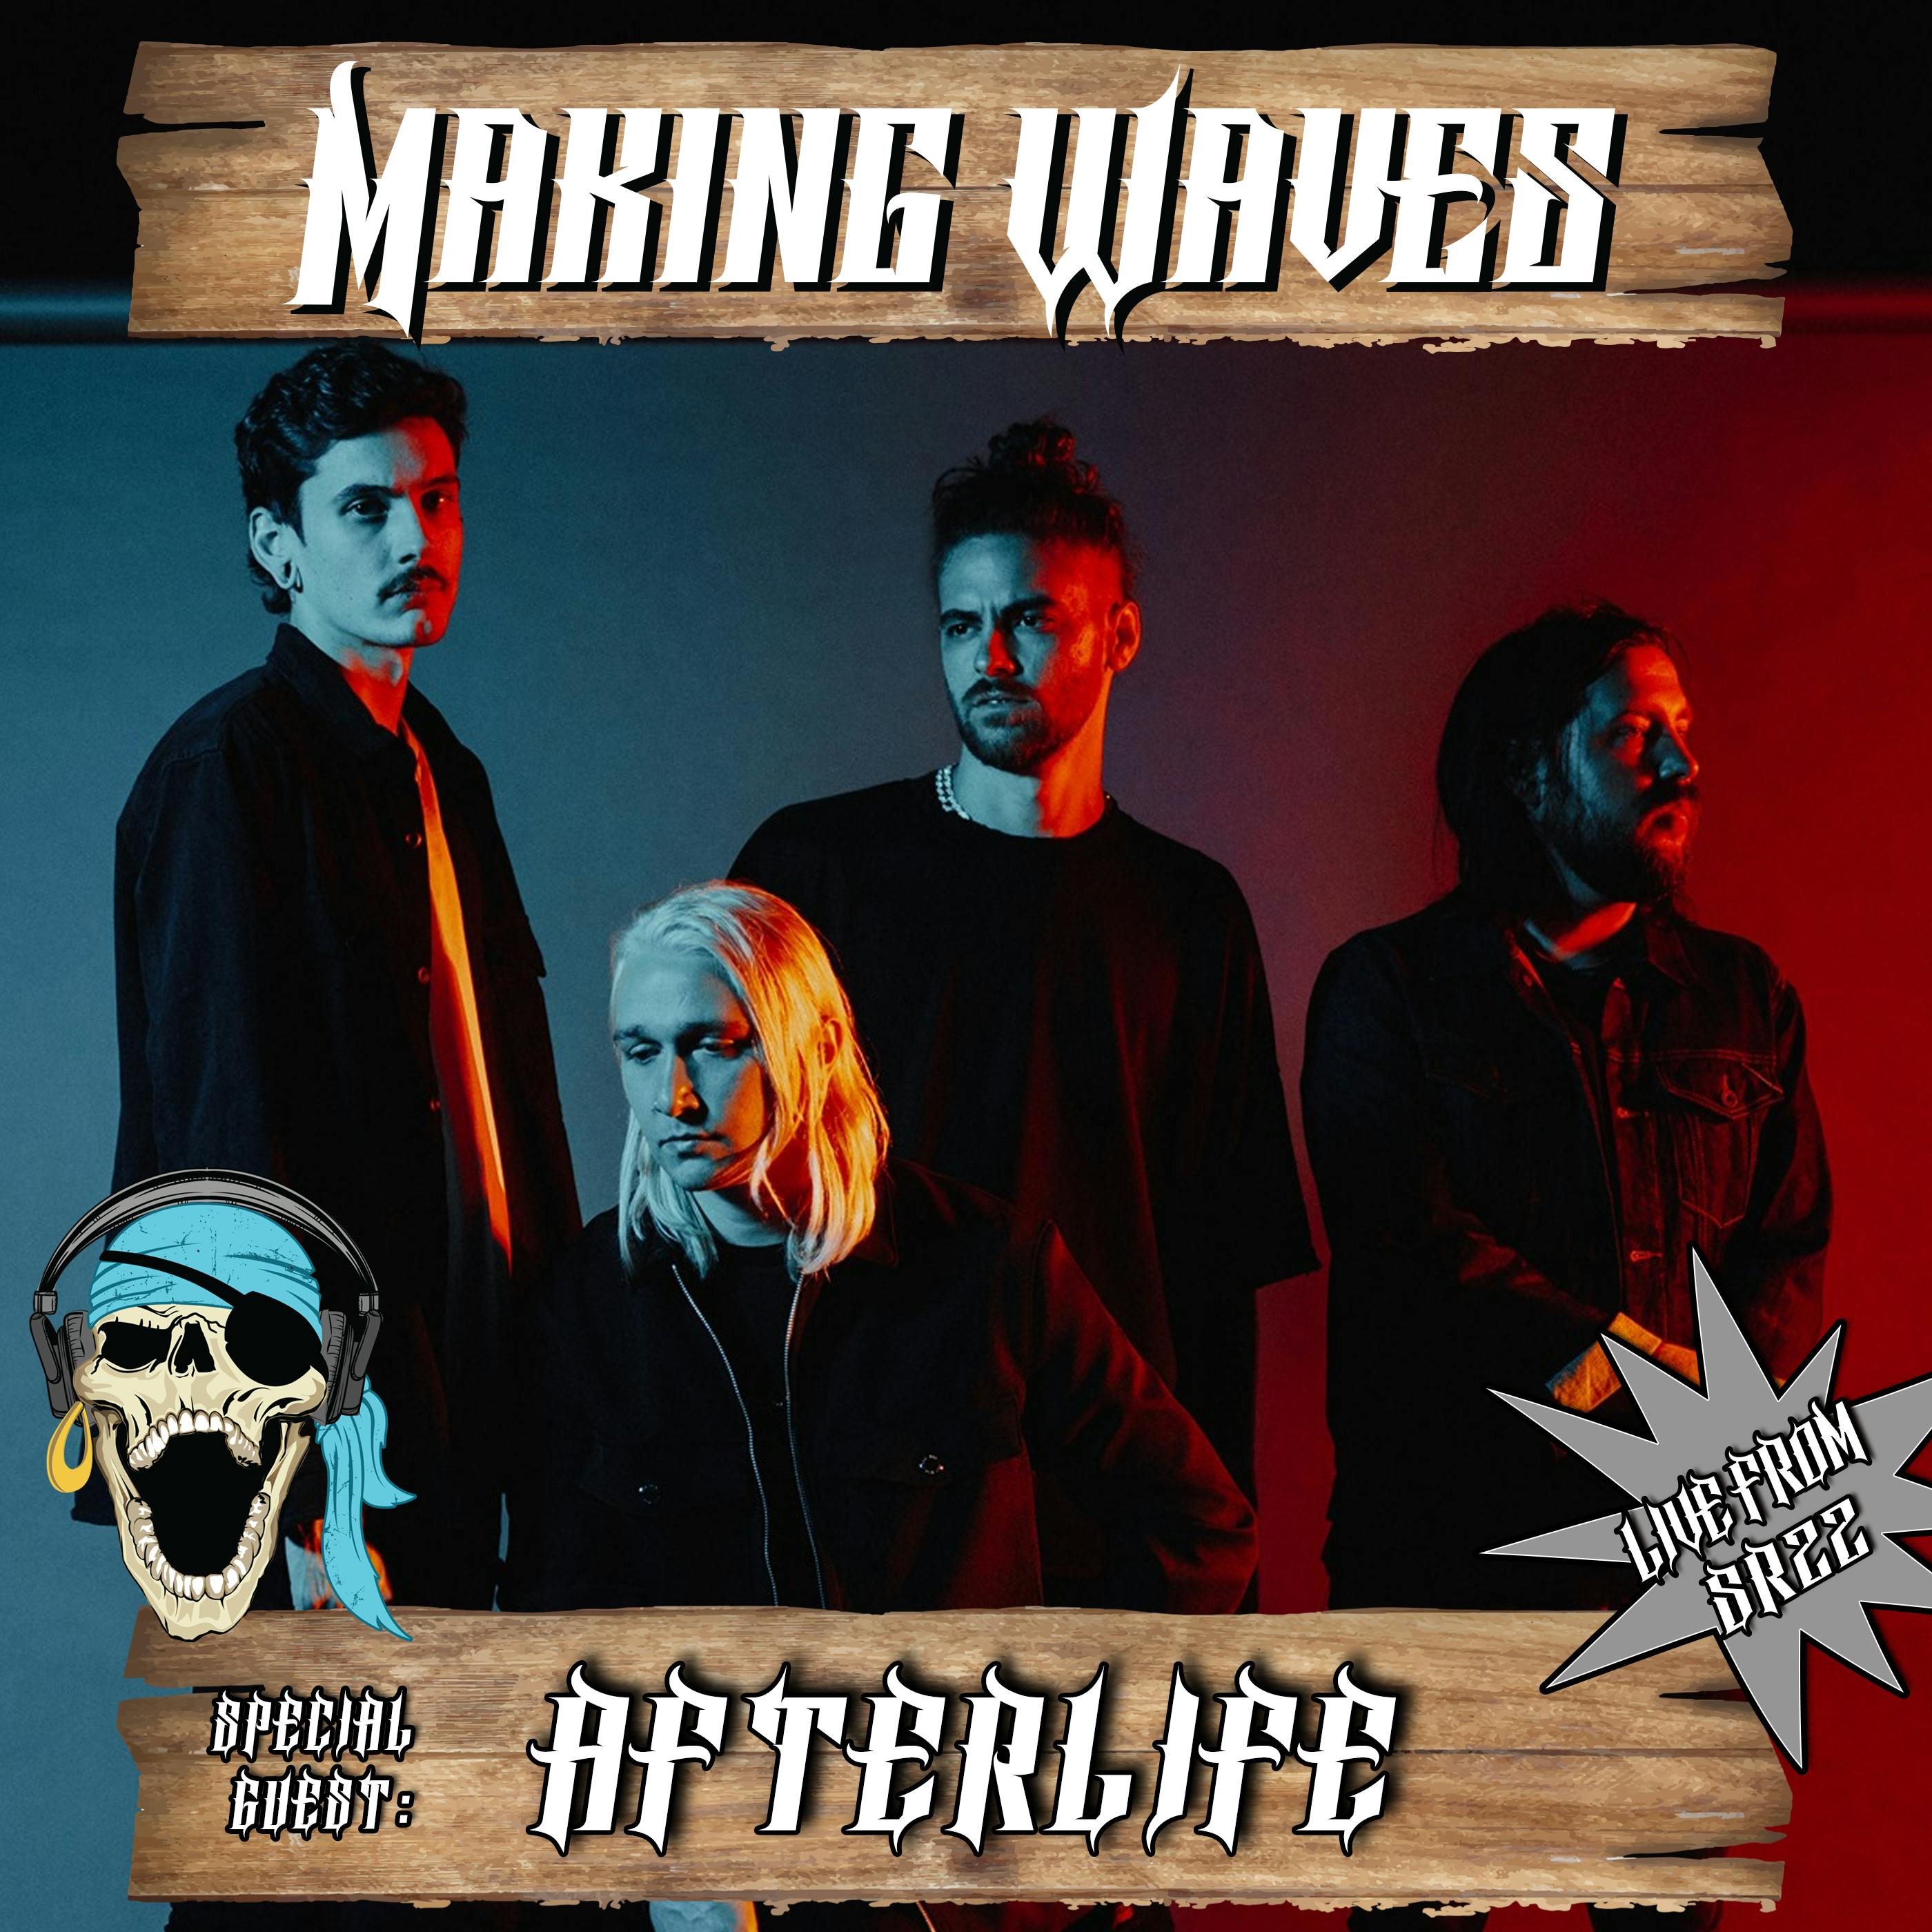 Ep. 72 LIVE FROM SHIPROCKED - Afterlife joins Making Waves!